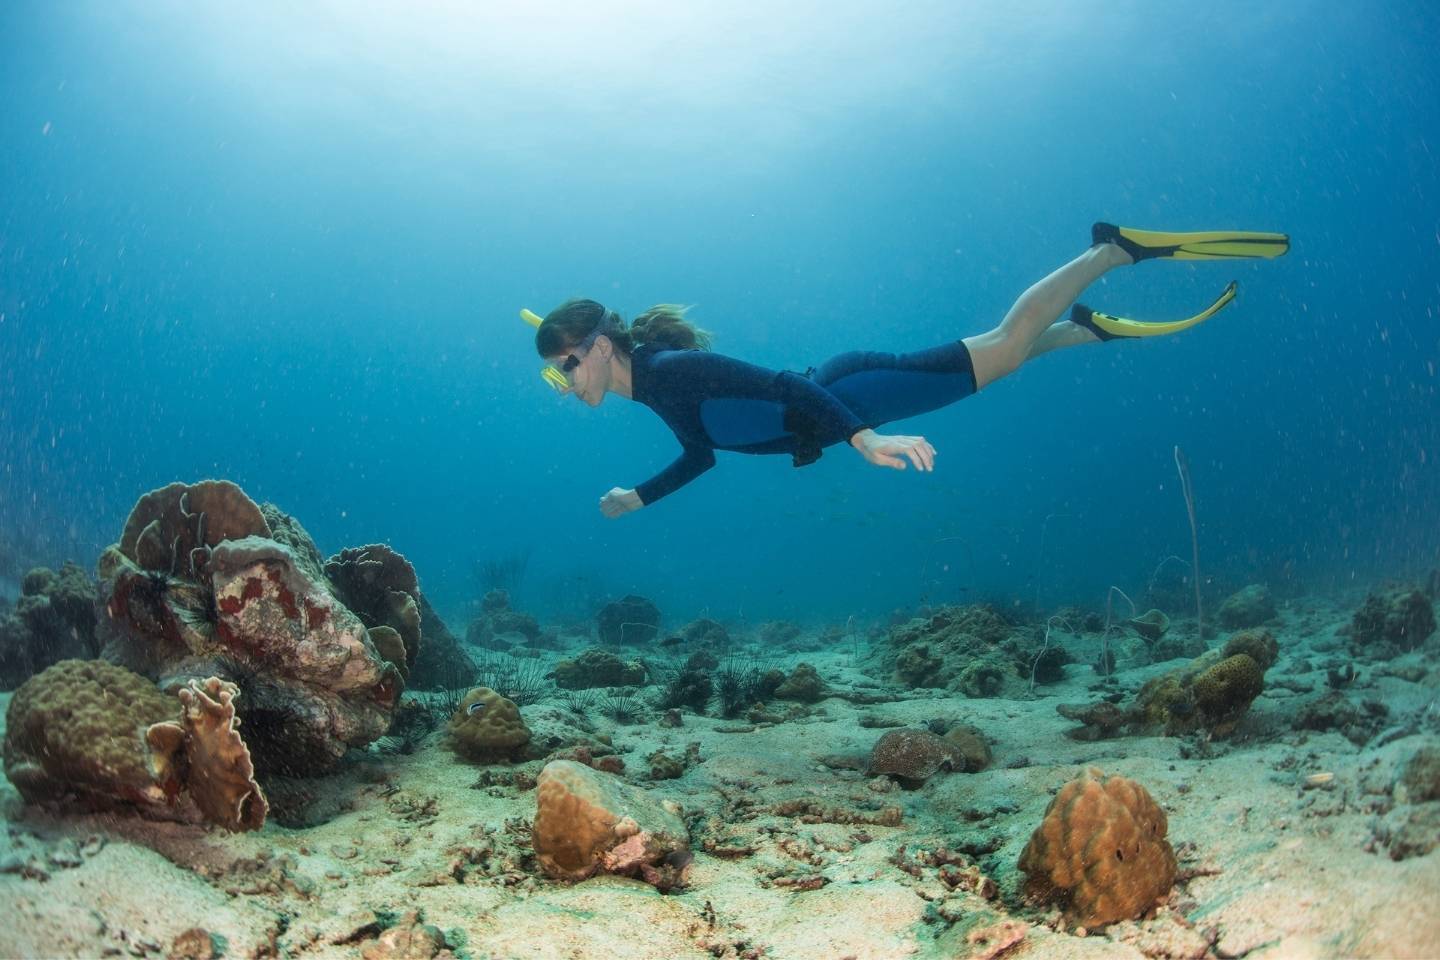 A fee diver woman swims under water above the sea fllor